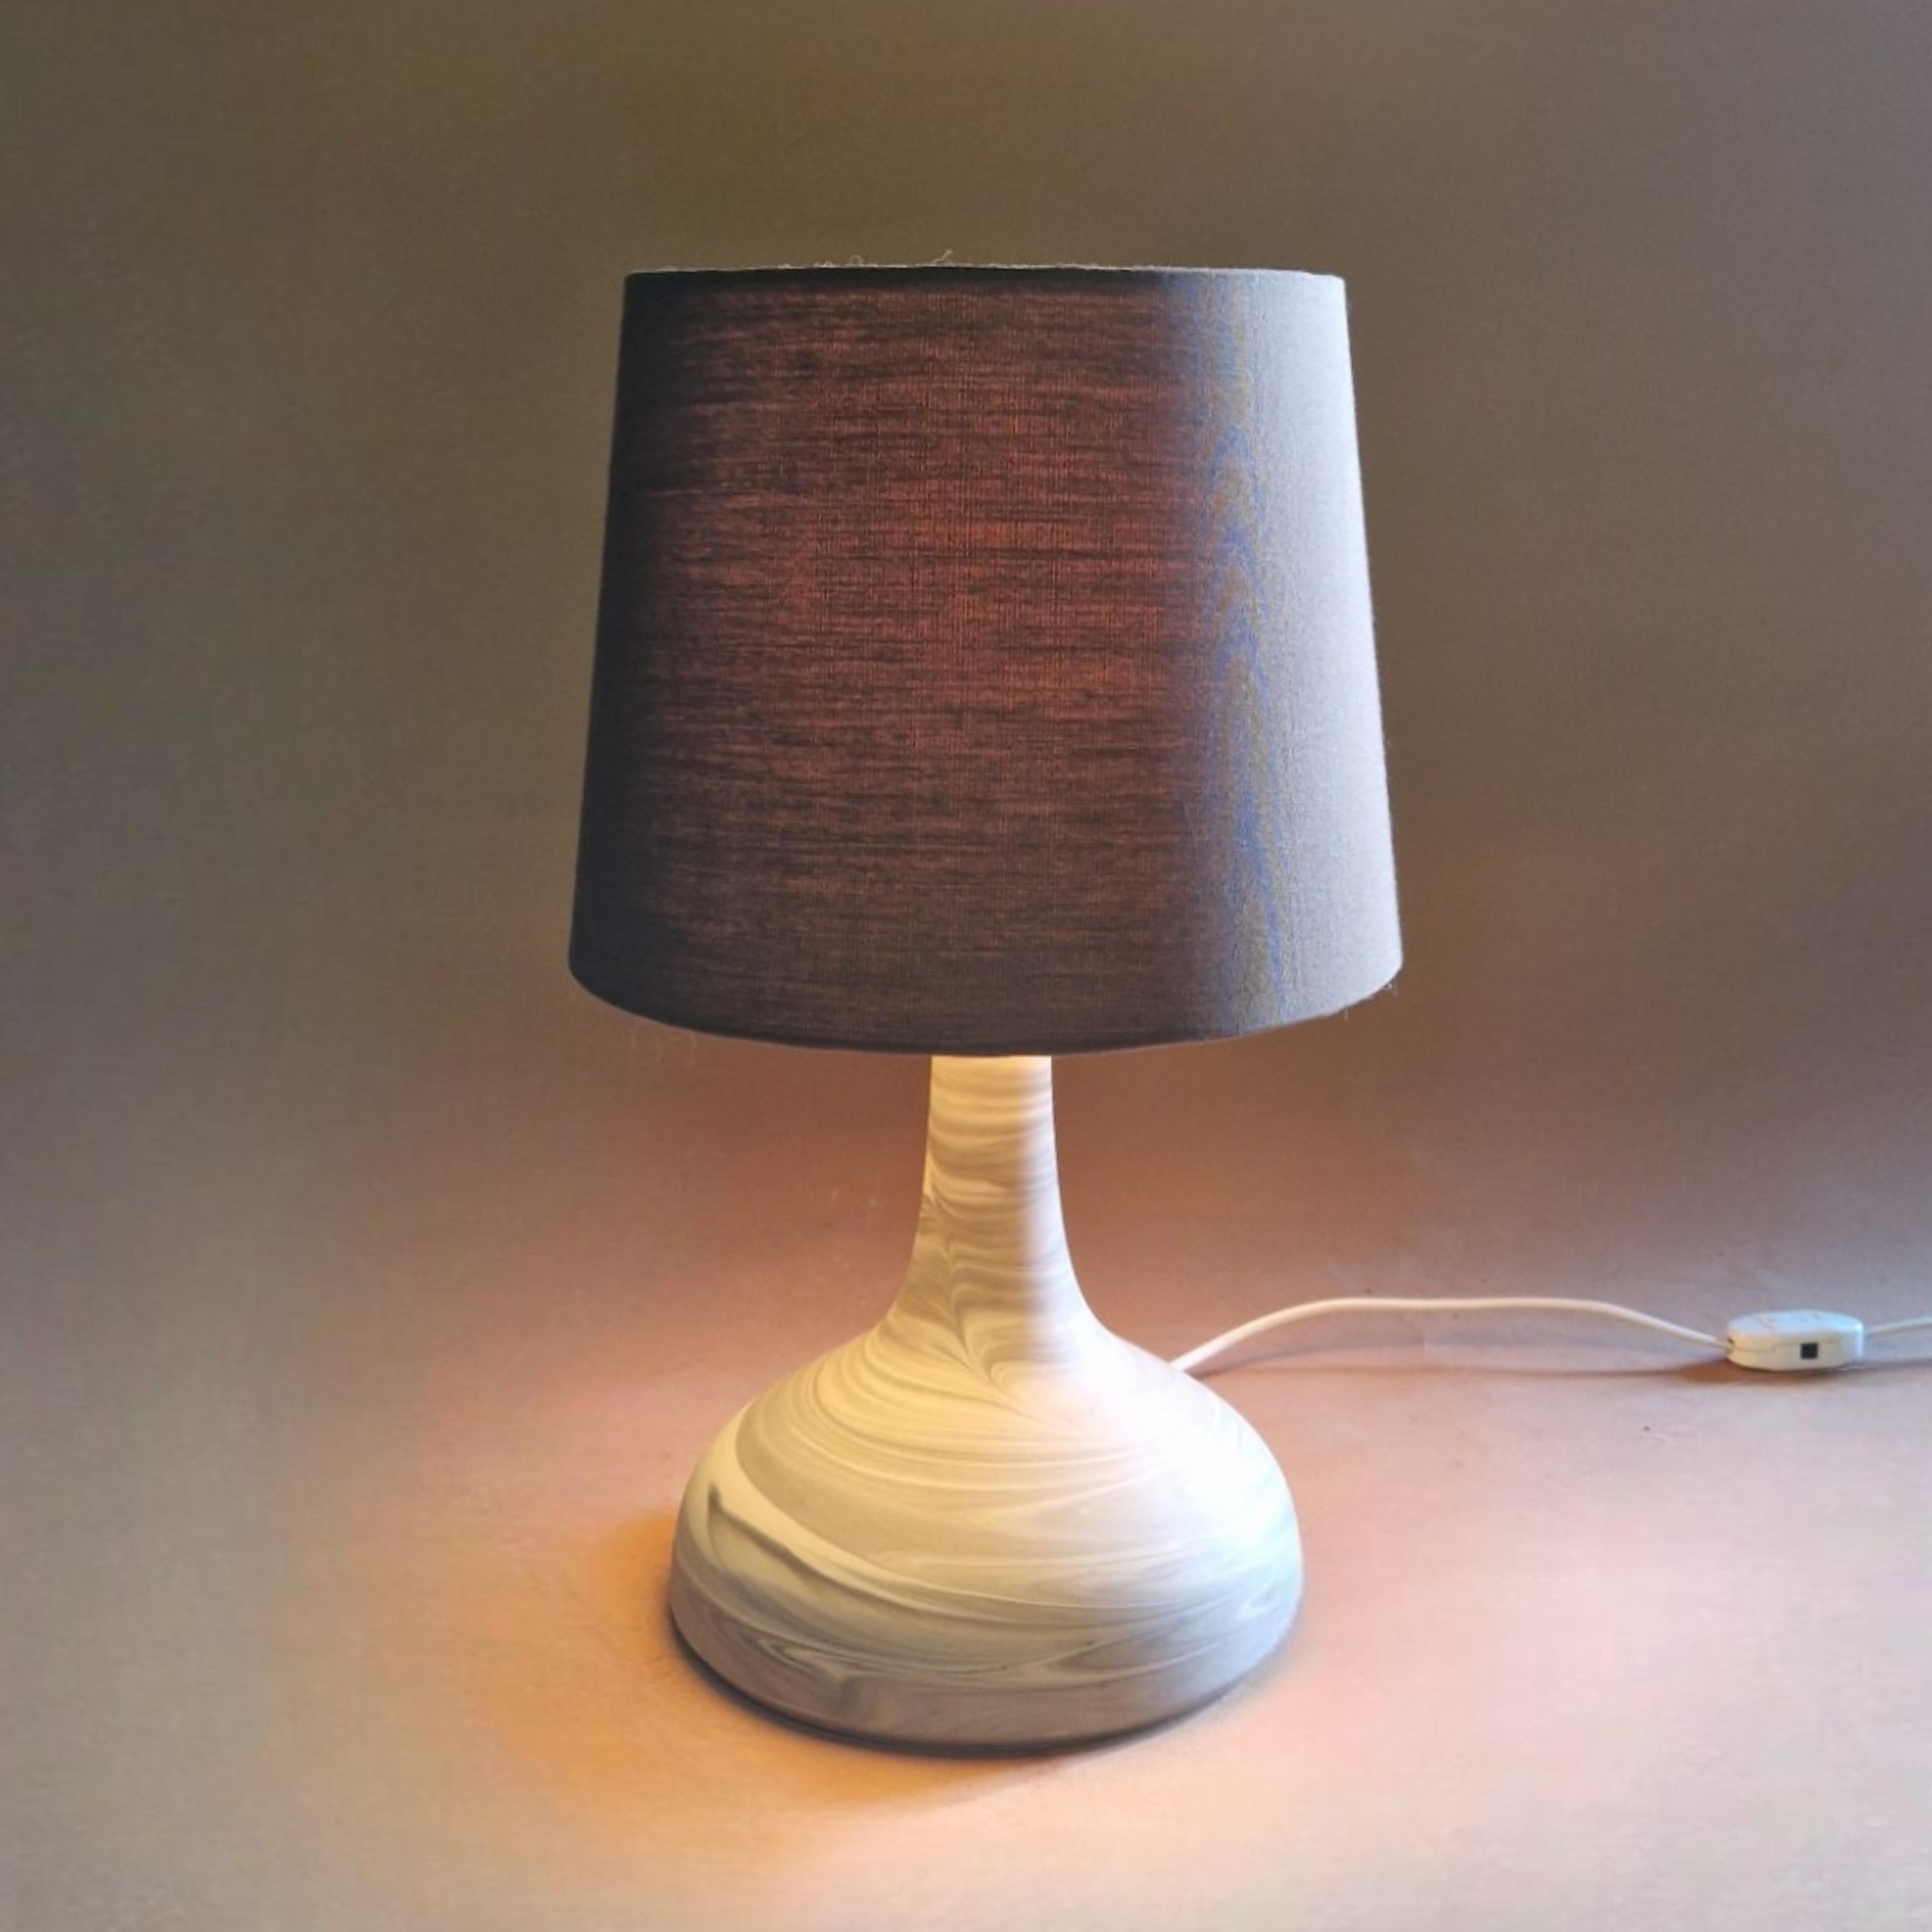 Ceramic mid century table lamp with a plexiglass diffusor and fabric shade. Most likely designed by Bjorn Wiinblad in the 1960s. The lamp is marked with the manufacturer stamp of Rosenthal. 
It is part of the 